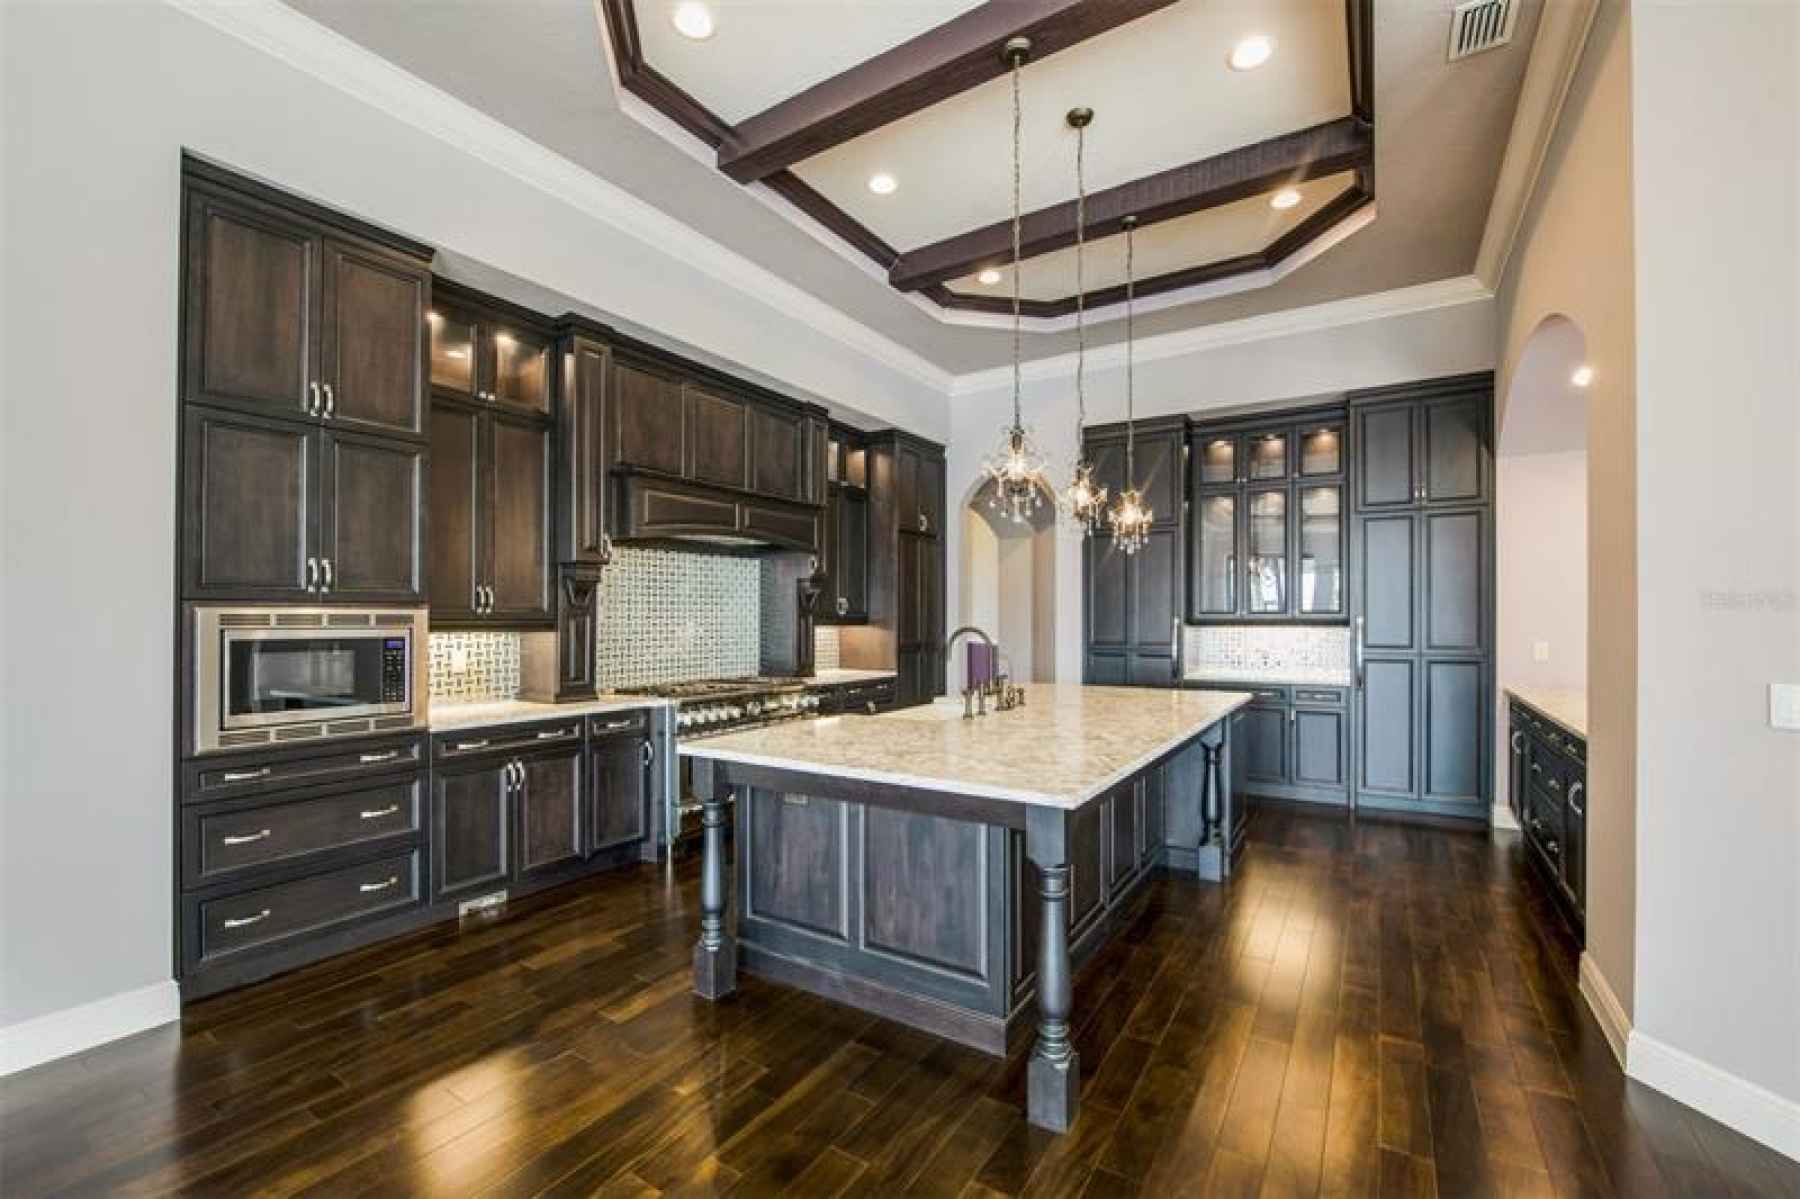 Spacious kitchen with quartz counters and tiled backsplash